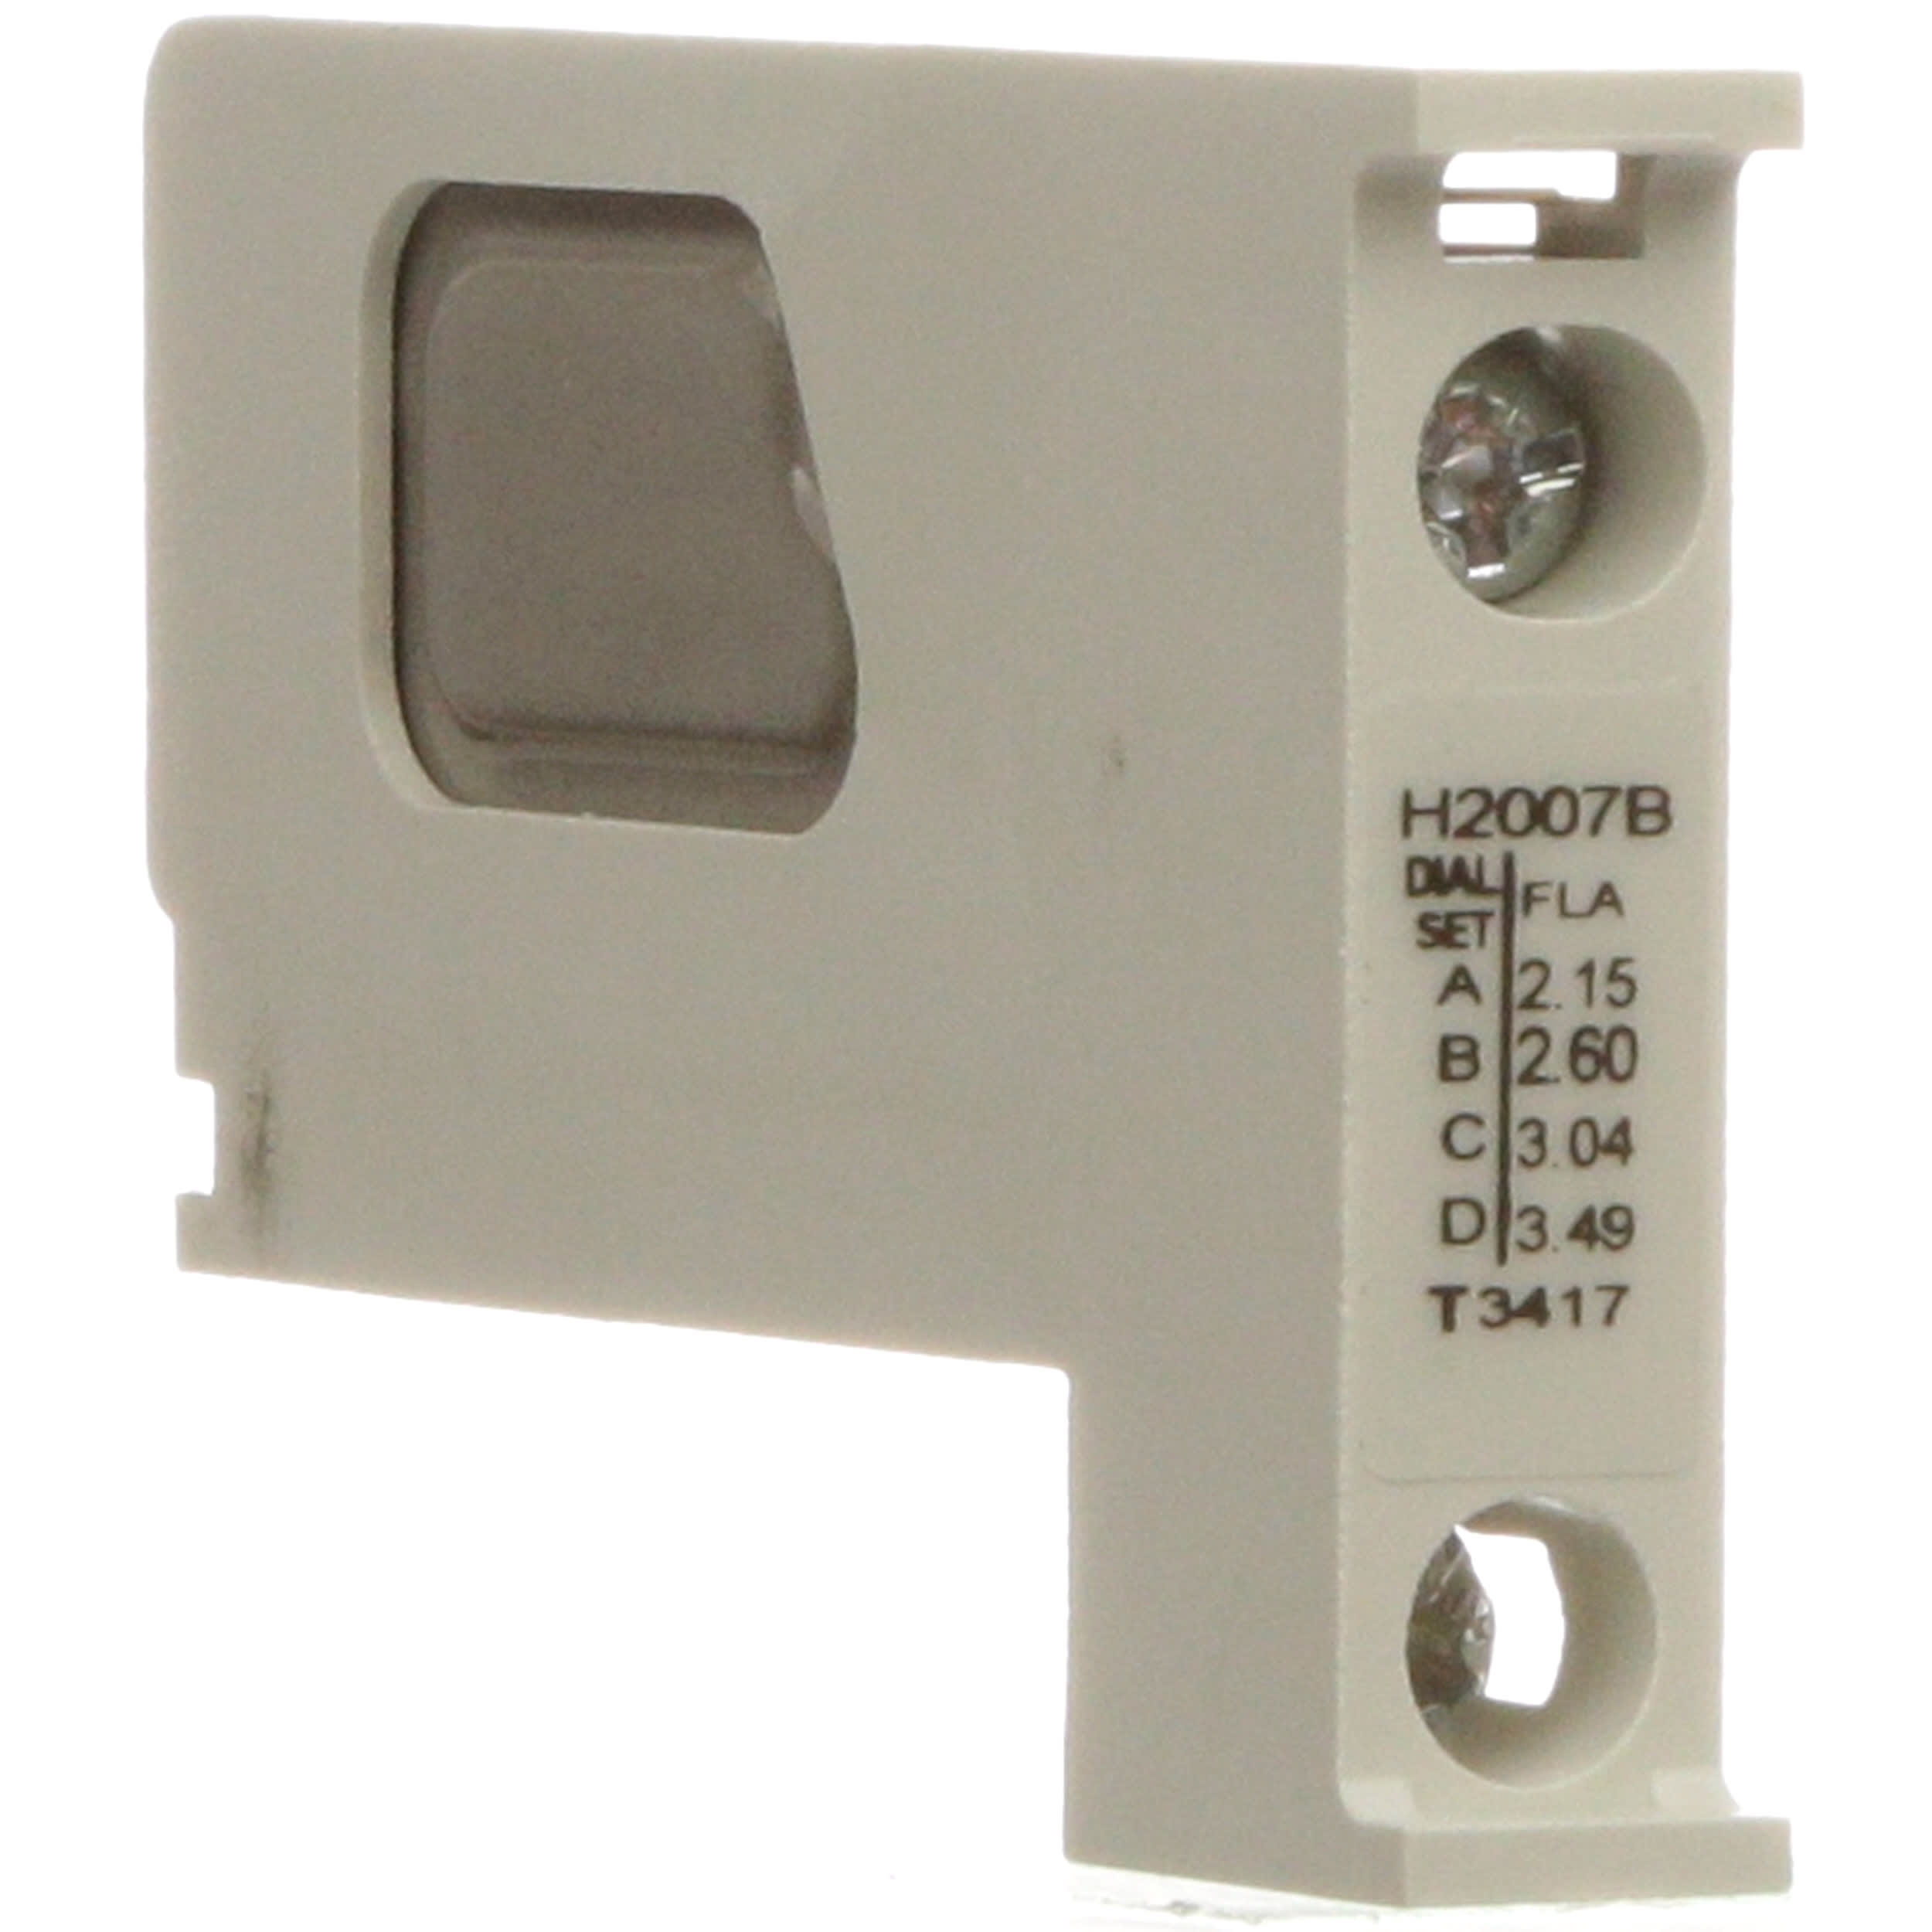 For Use With NEMA Sizes 00-0 Series C NEMA Sizes 1-2 Eaton H2007B-3 2.15 to 3.49 Full Load Amps Thermal Unit